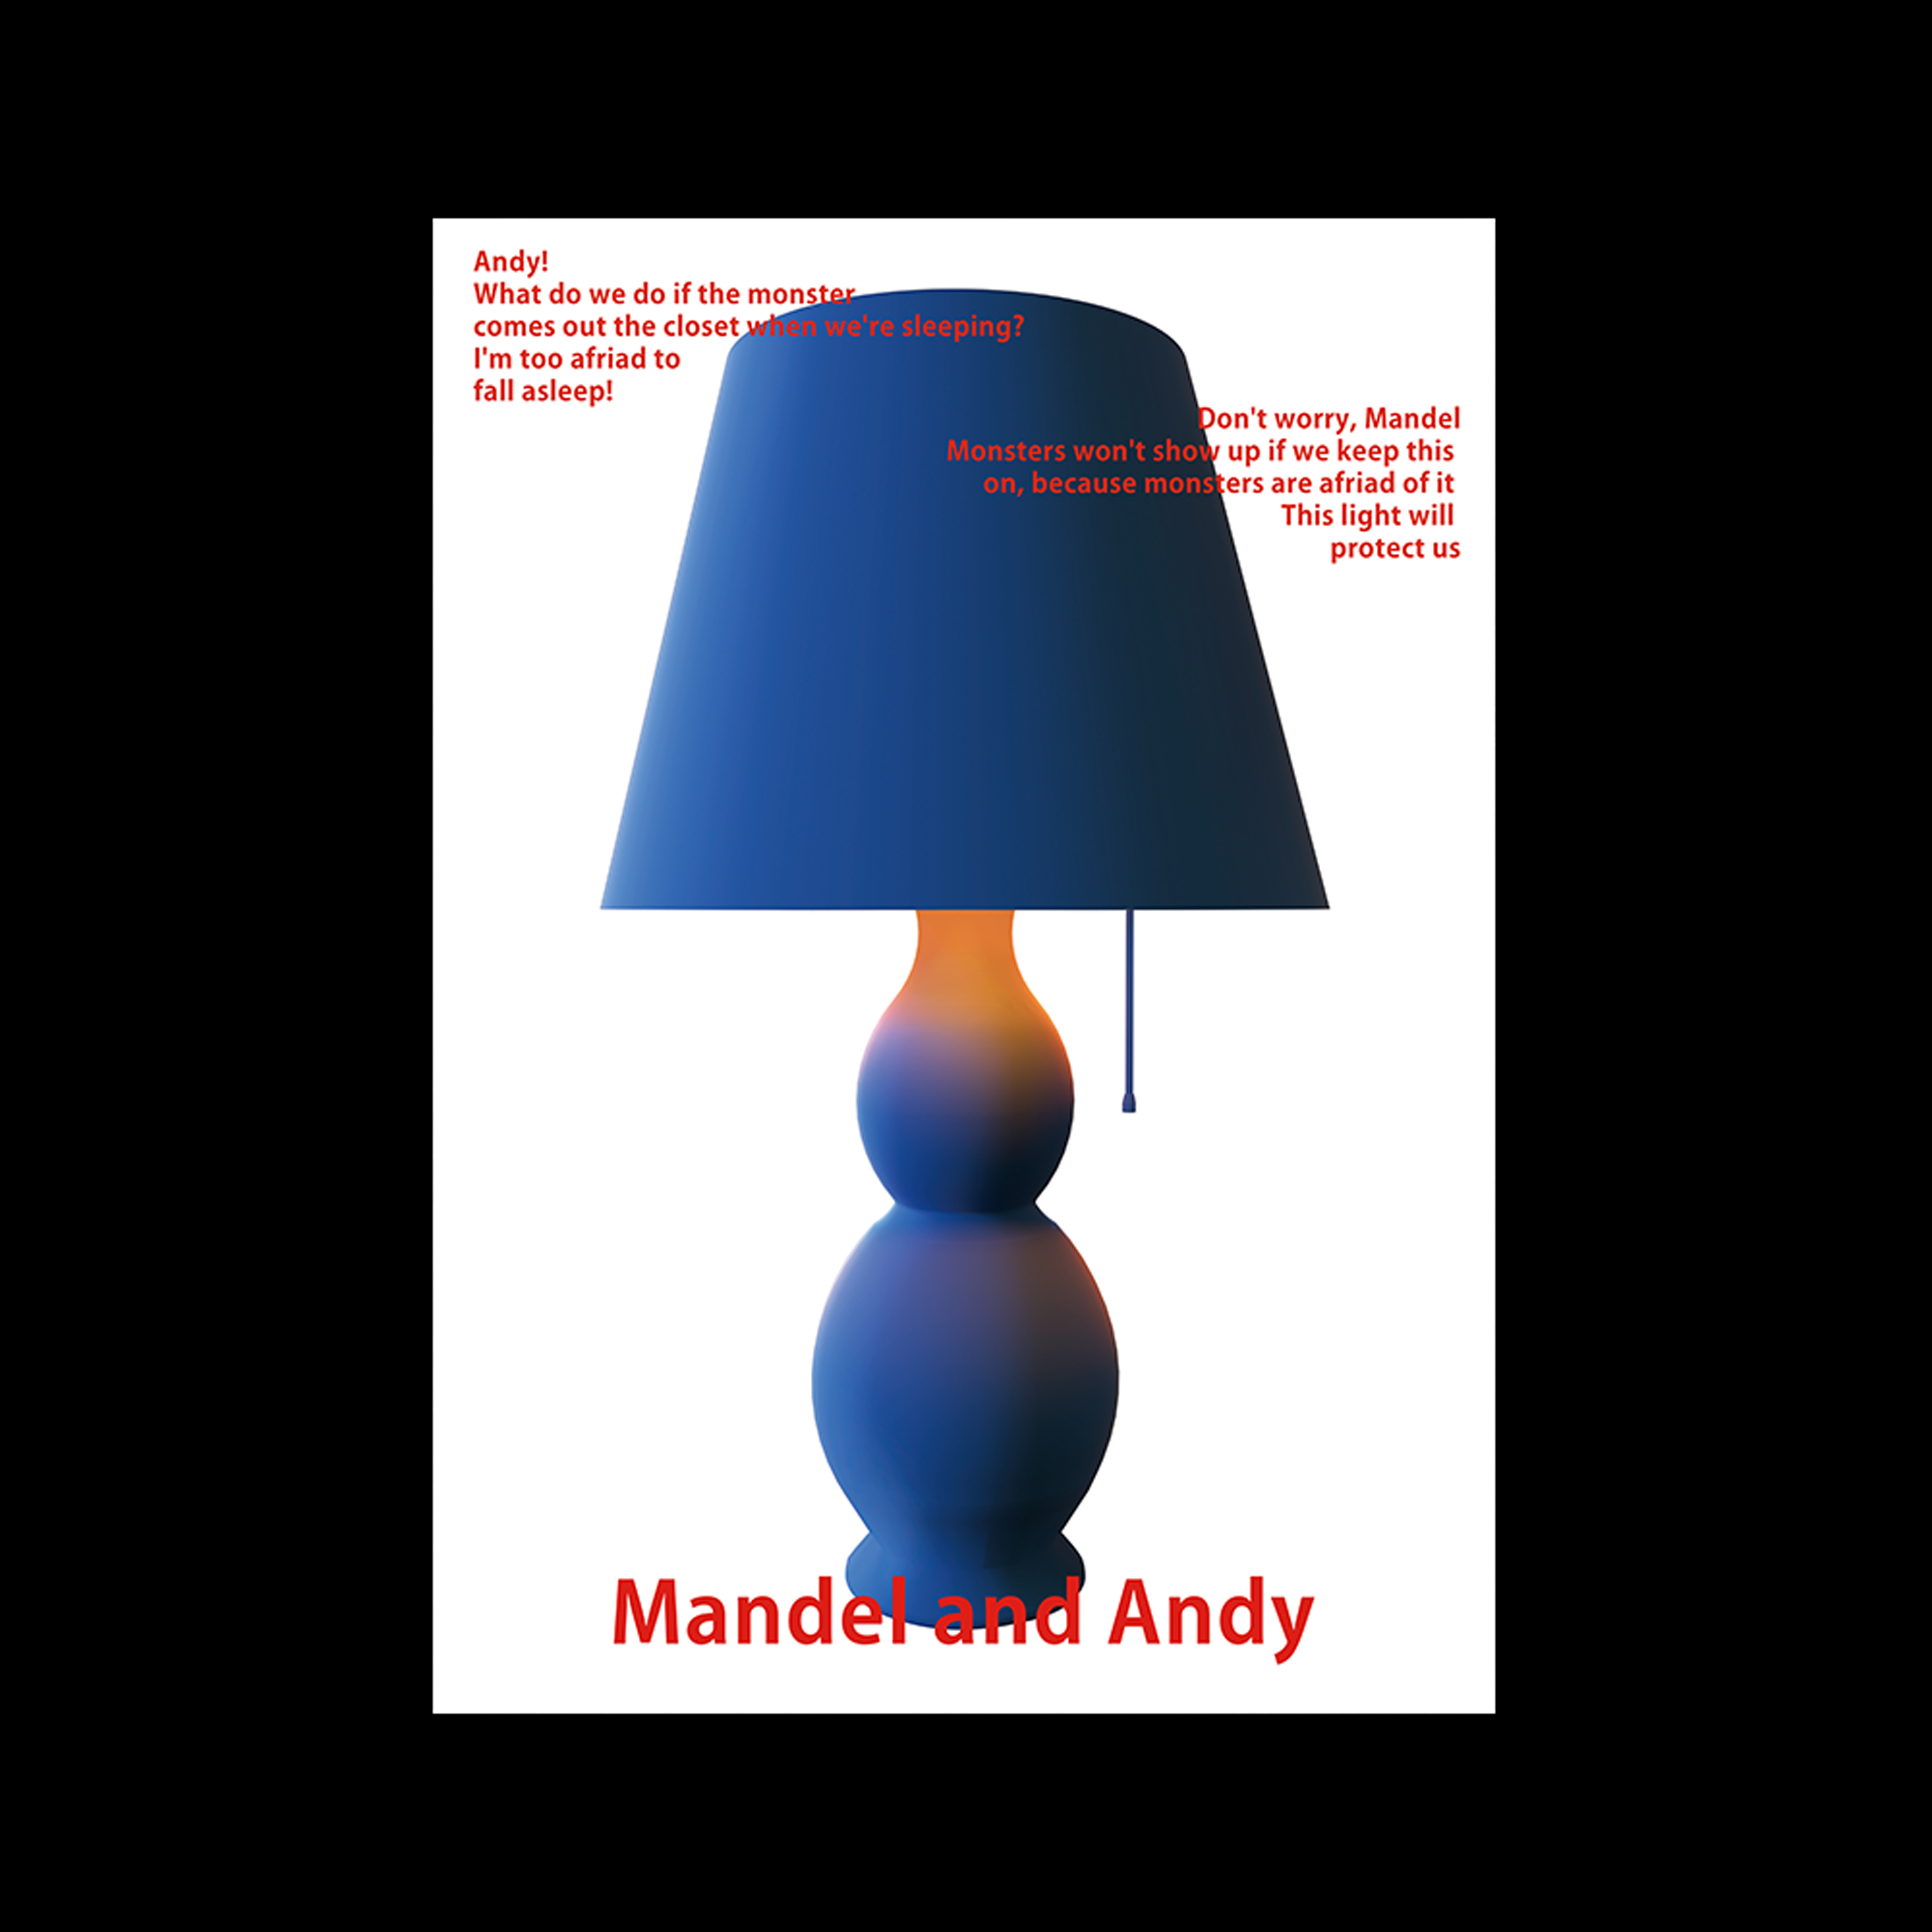 Mandel and Andy